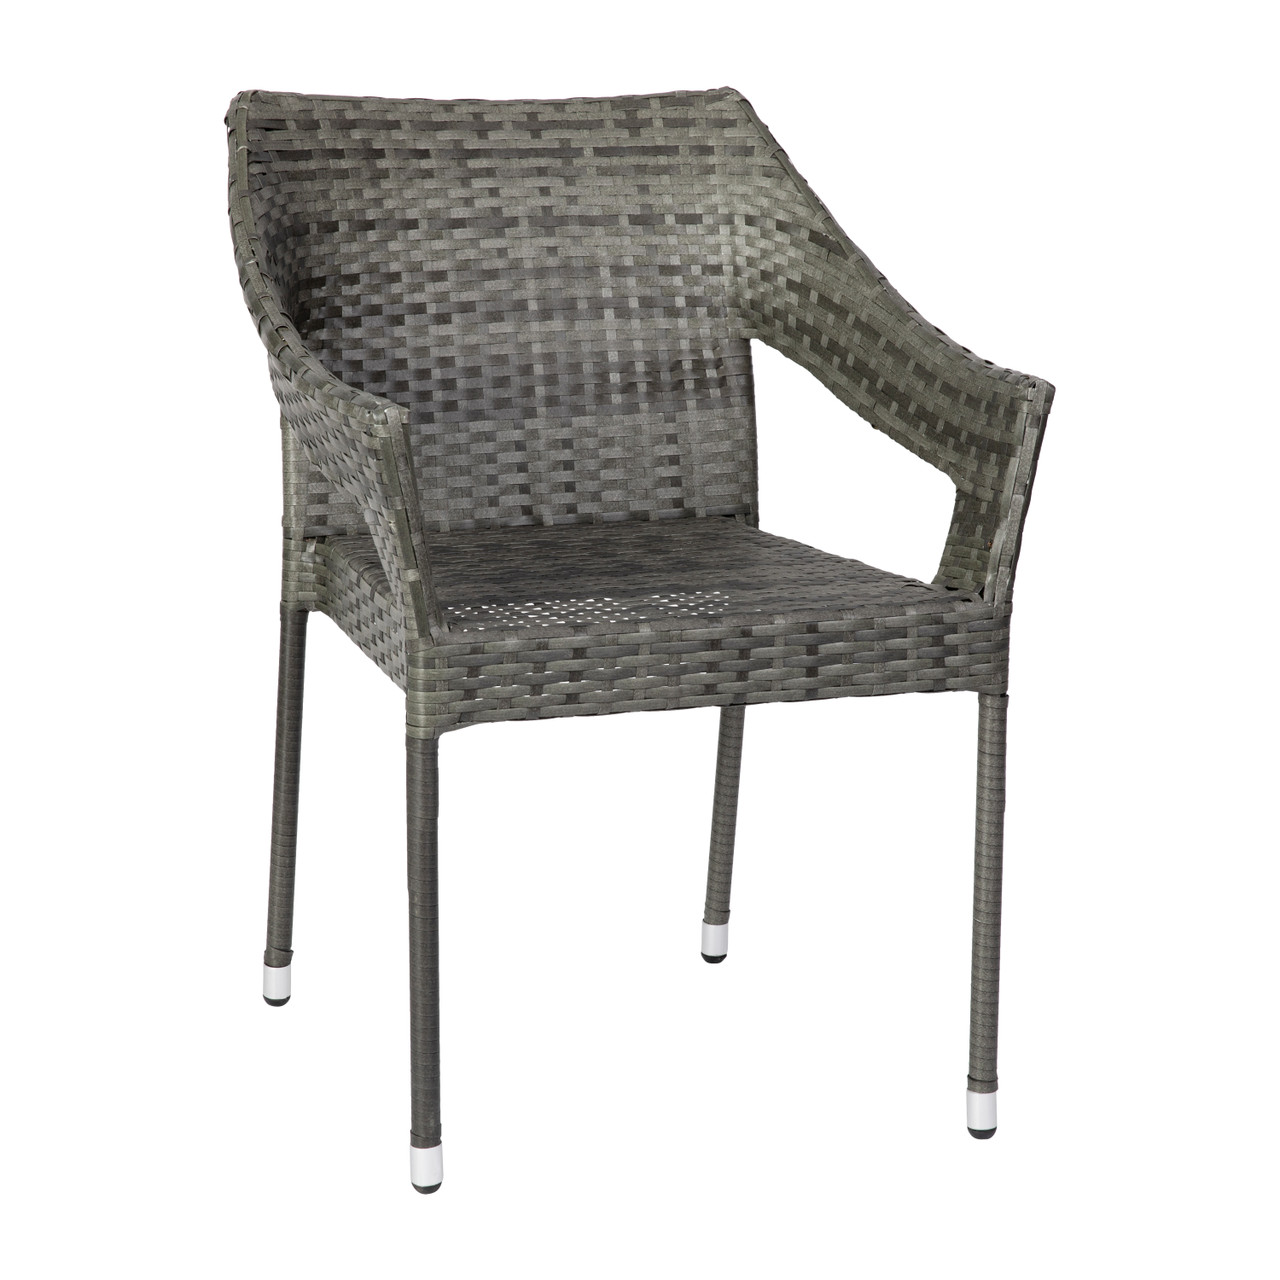 Flash Furniture Ethan Commercial Grade Stacking Patio Chair, All Weather PE Rattan Wicker Patio Dining Chair in Gray, Model# TT-TT02-GY-GG